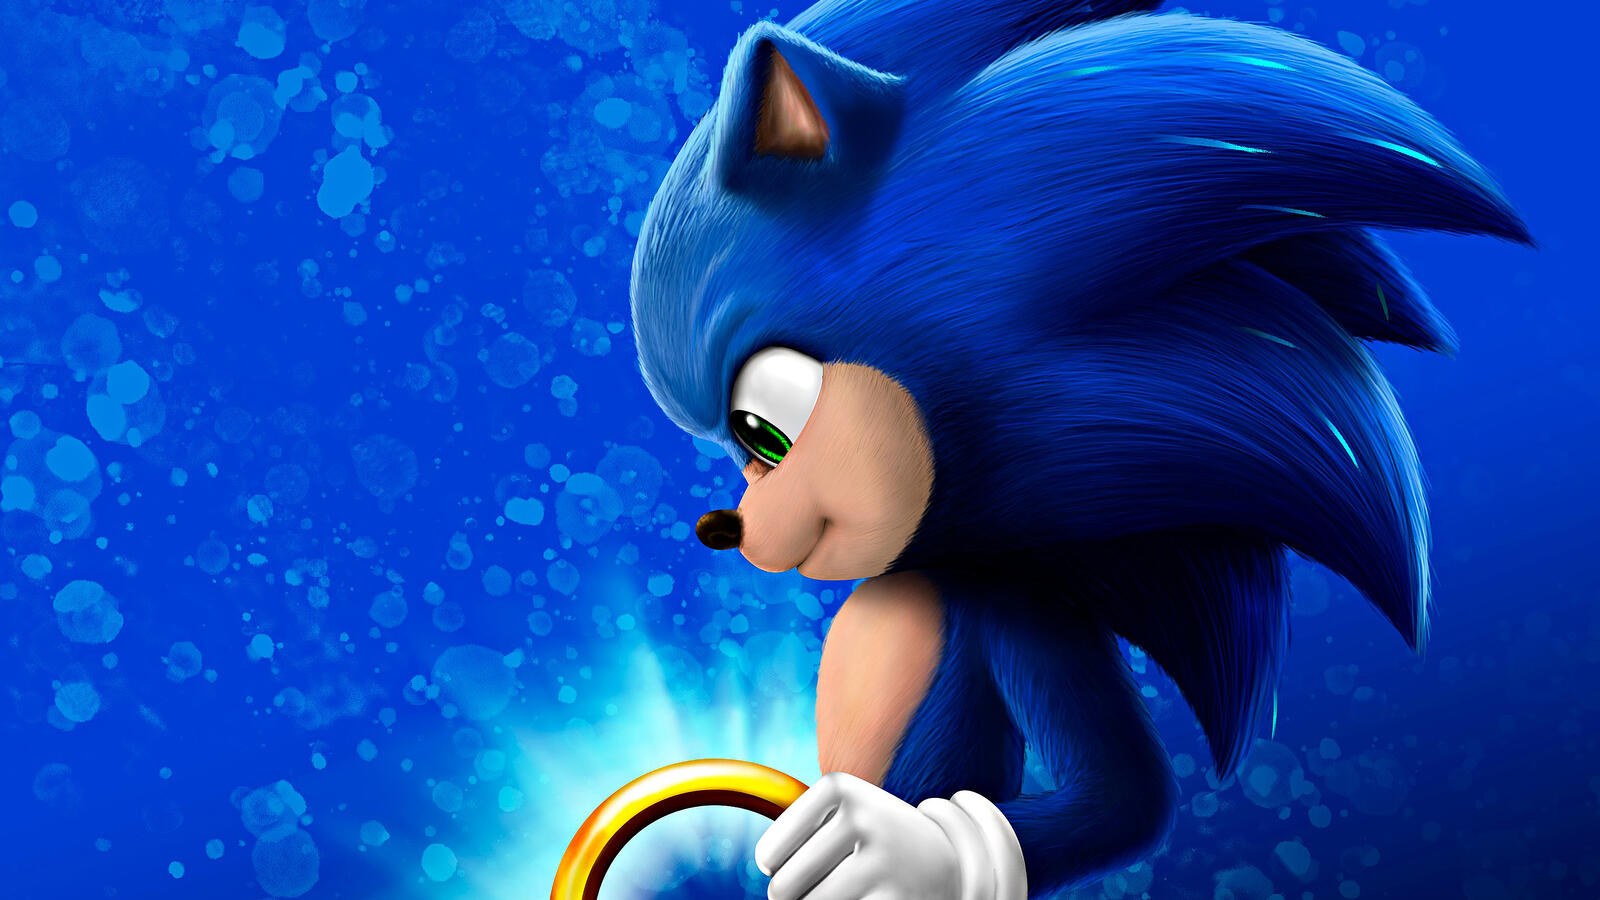 Wallpapers Sonic 2020 Movies blue on the desktop